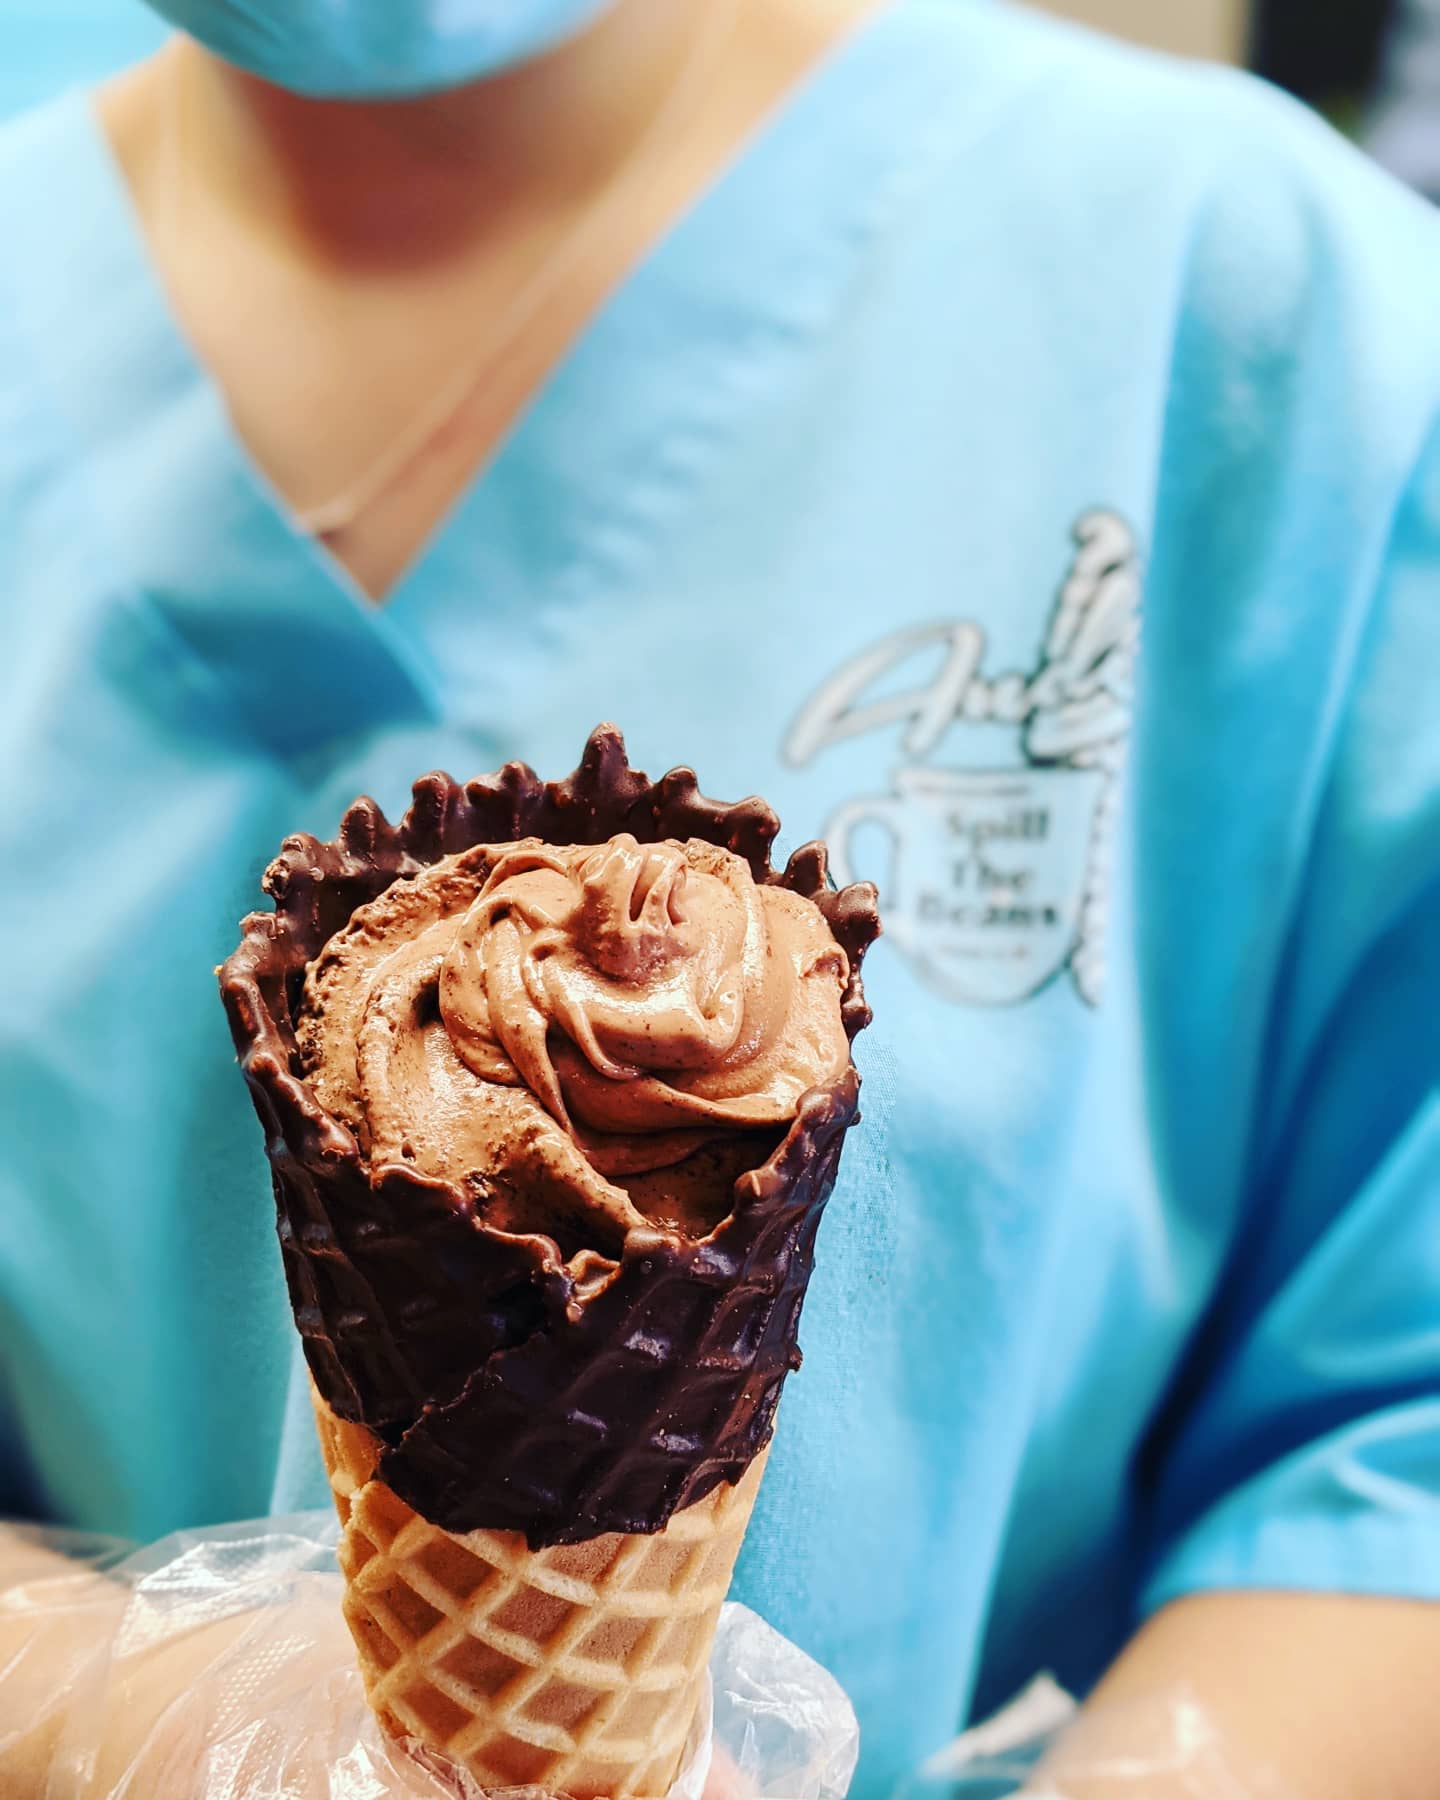 Ice creams served in a chocolate dipped waffle cone